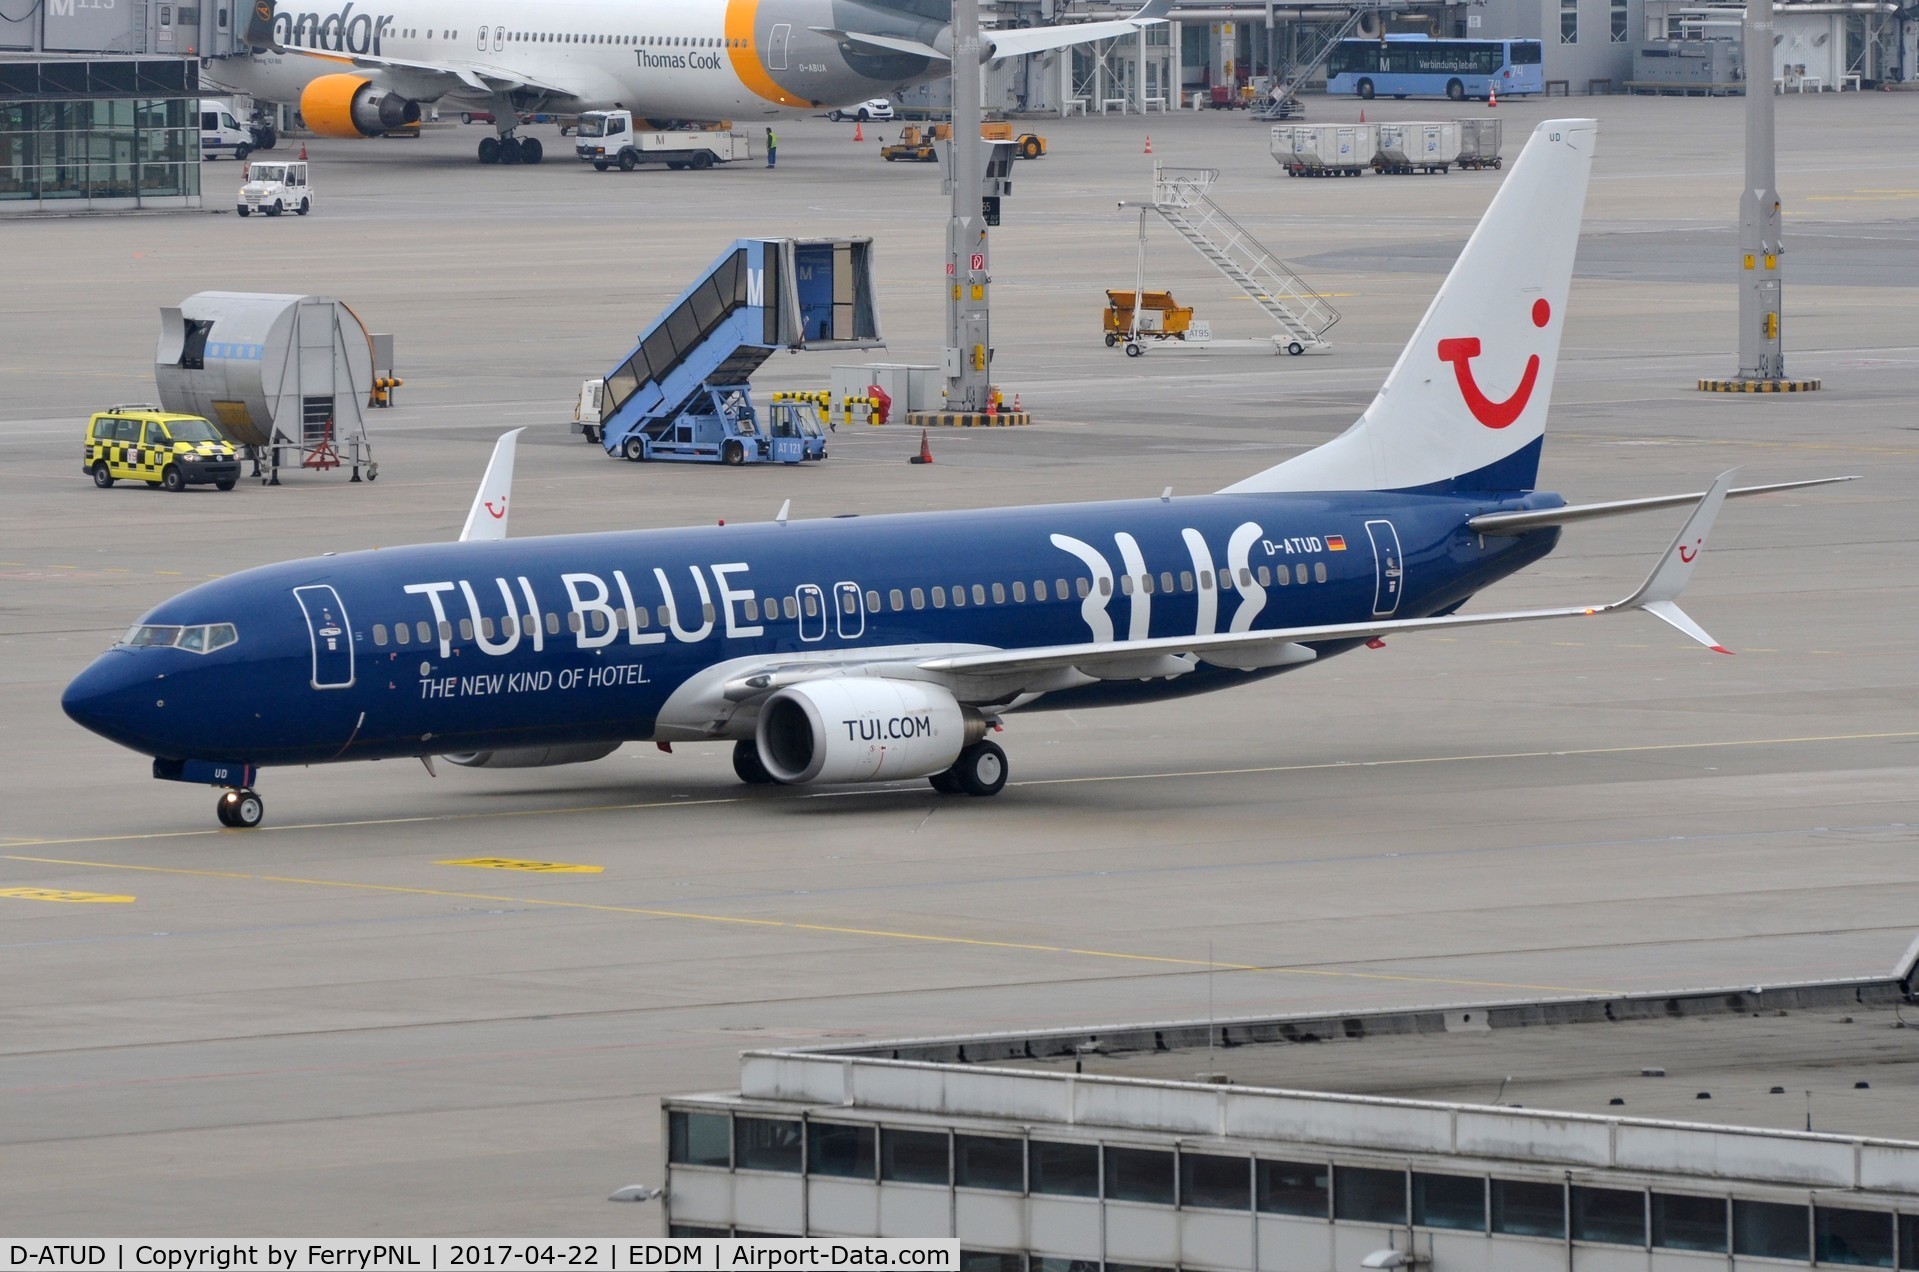 D-ATUD, 2006 Boeing 737-8K5 C/N 34685, TUI B738 promoting its hotels division